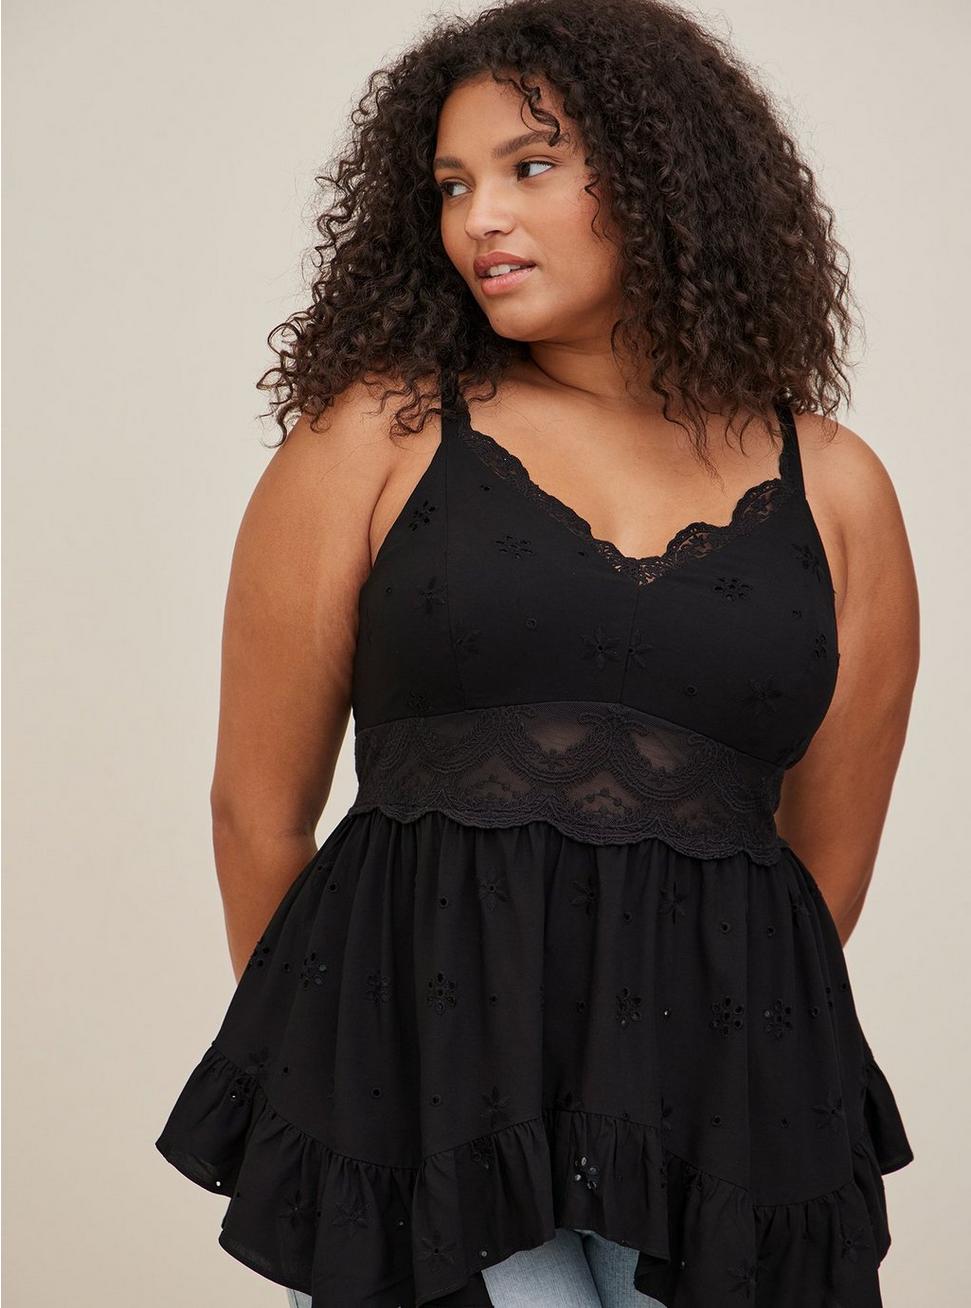 Plus Size Babydoll Eyelet With Lace Detail Top, DEEP BLACK, hi-res